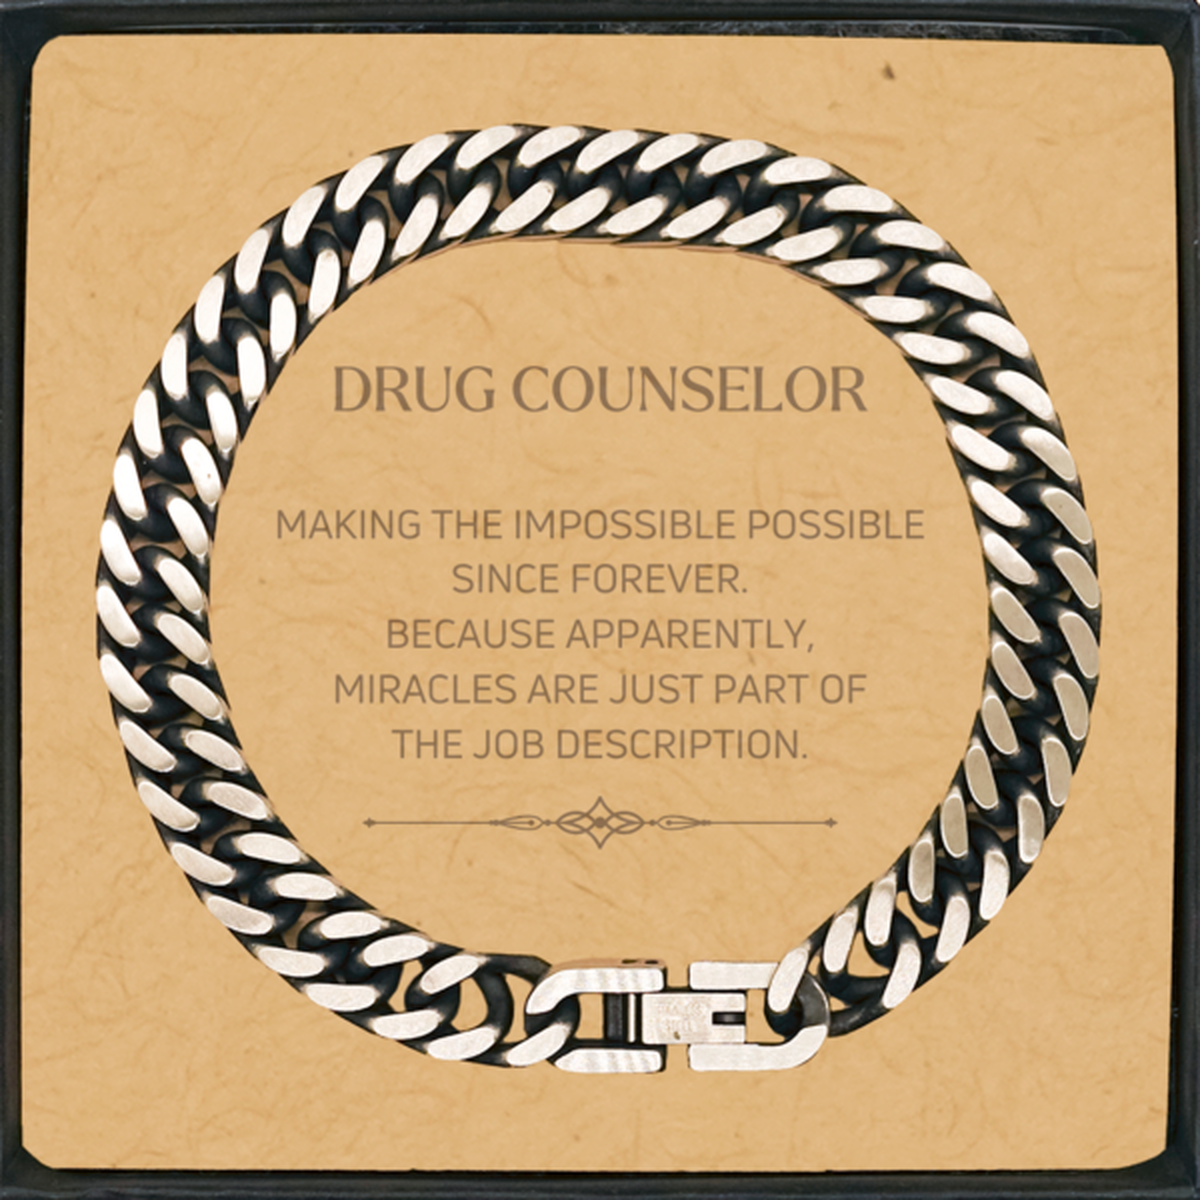 Funny Drug Counselor Gifts, Miracles are just part of the job description, Inspirational Birthday Cuban Link Chain Bracelet For Drug Counselor, Men, Women, Coworkers, Friends, Boss